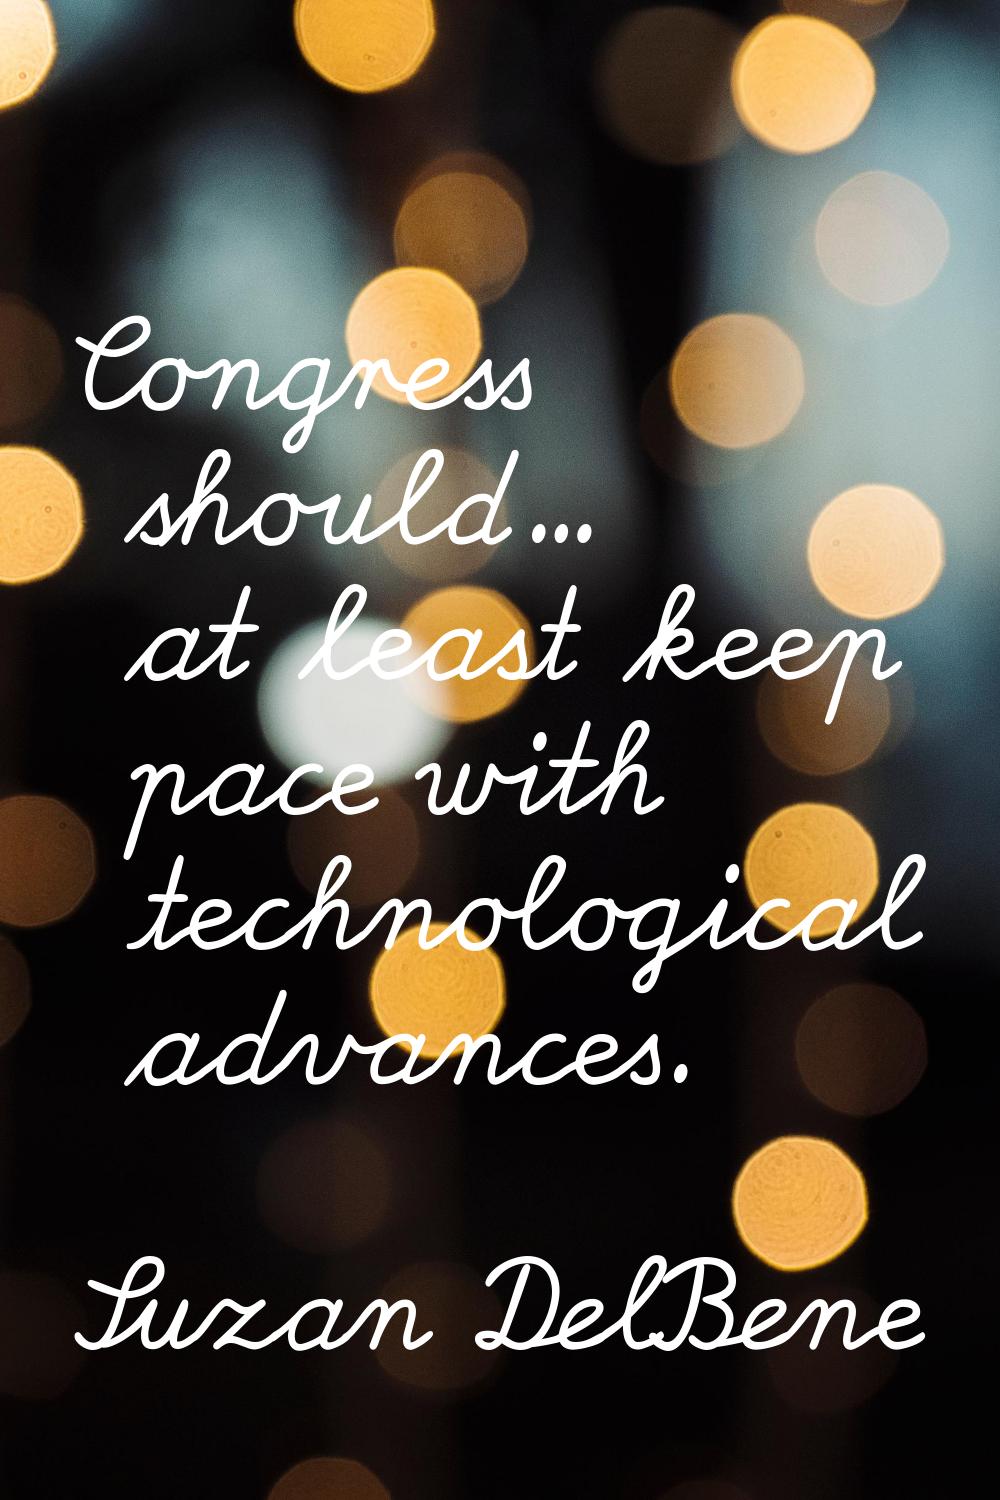 Congress should... at least keep pace with technological advances.